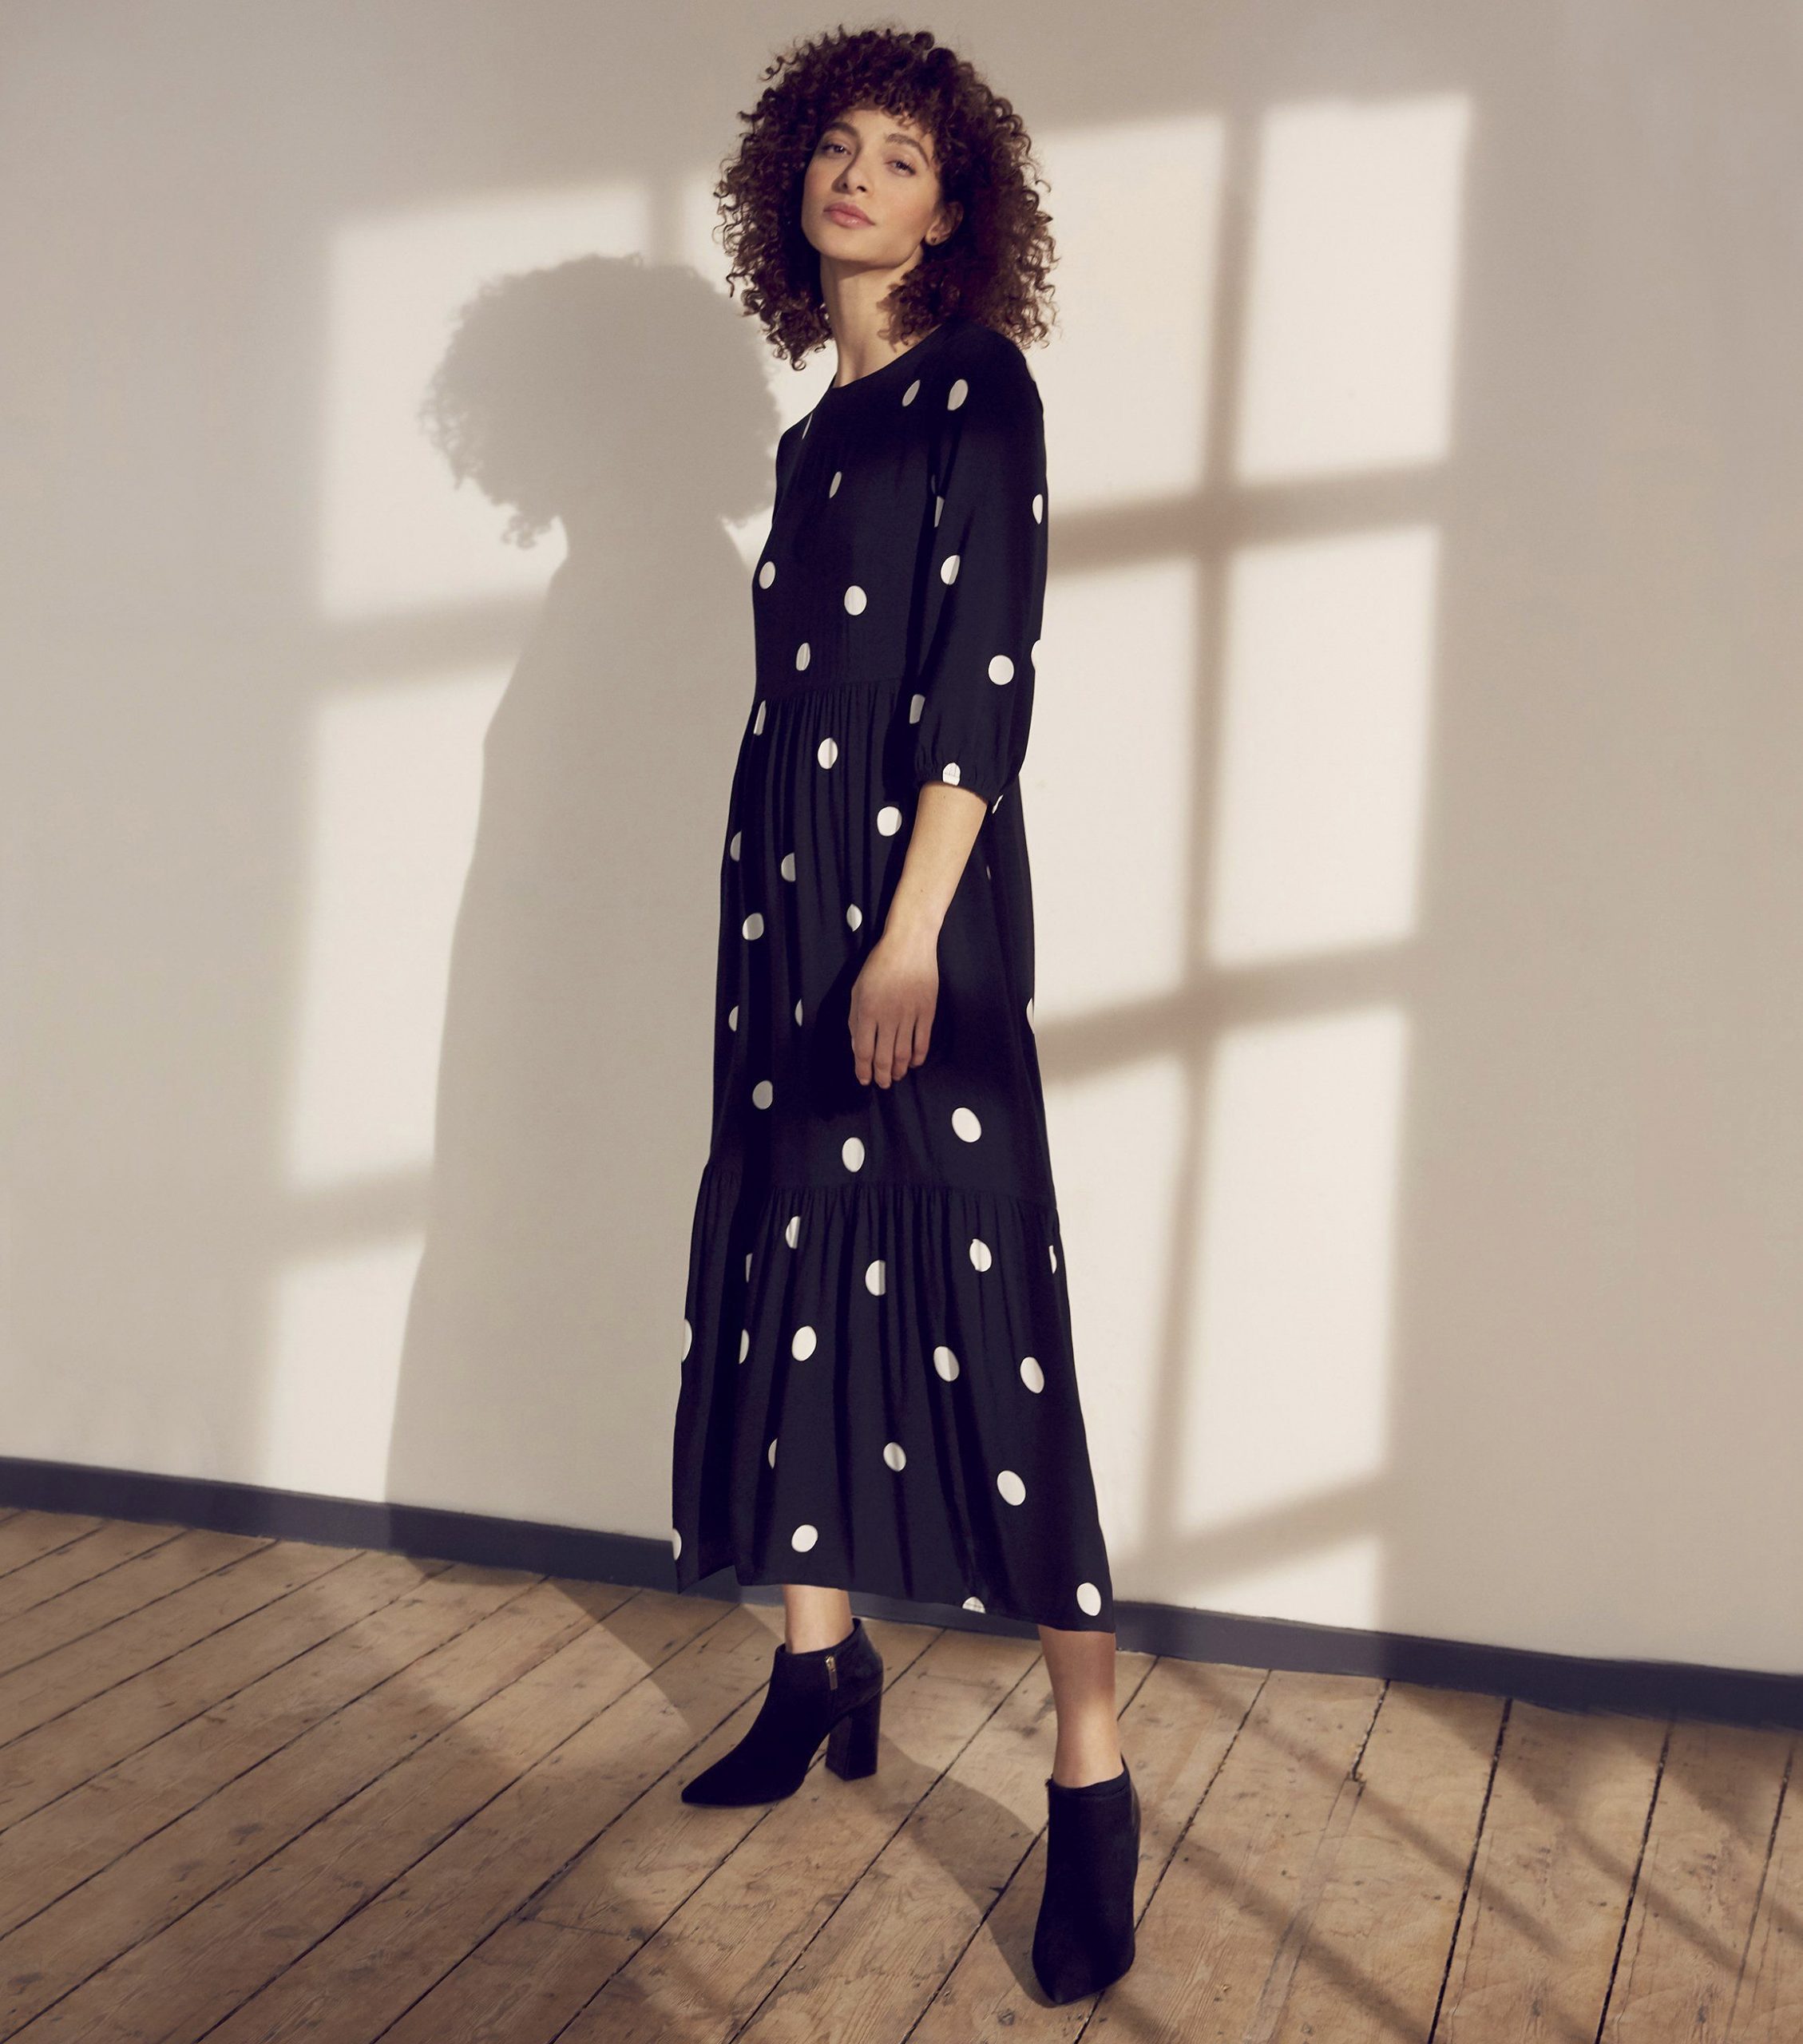 Long sleeve dress edit: 10 dresses with sleeves that cost £30 or less |  Woman & Home